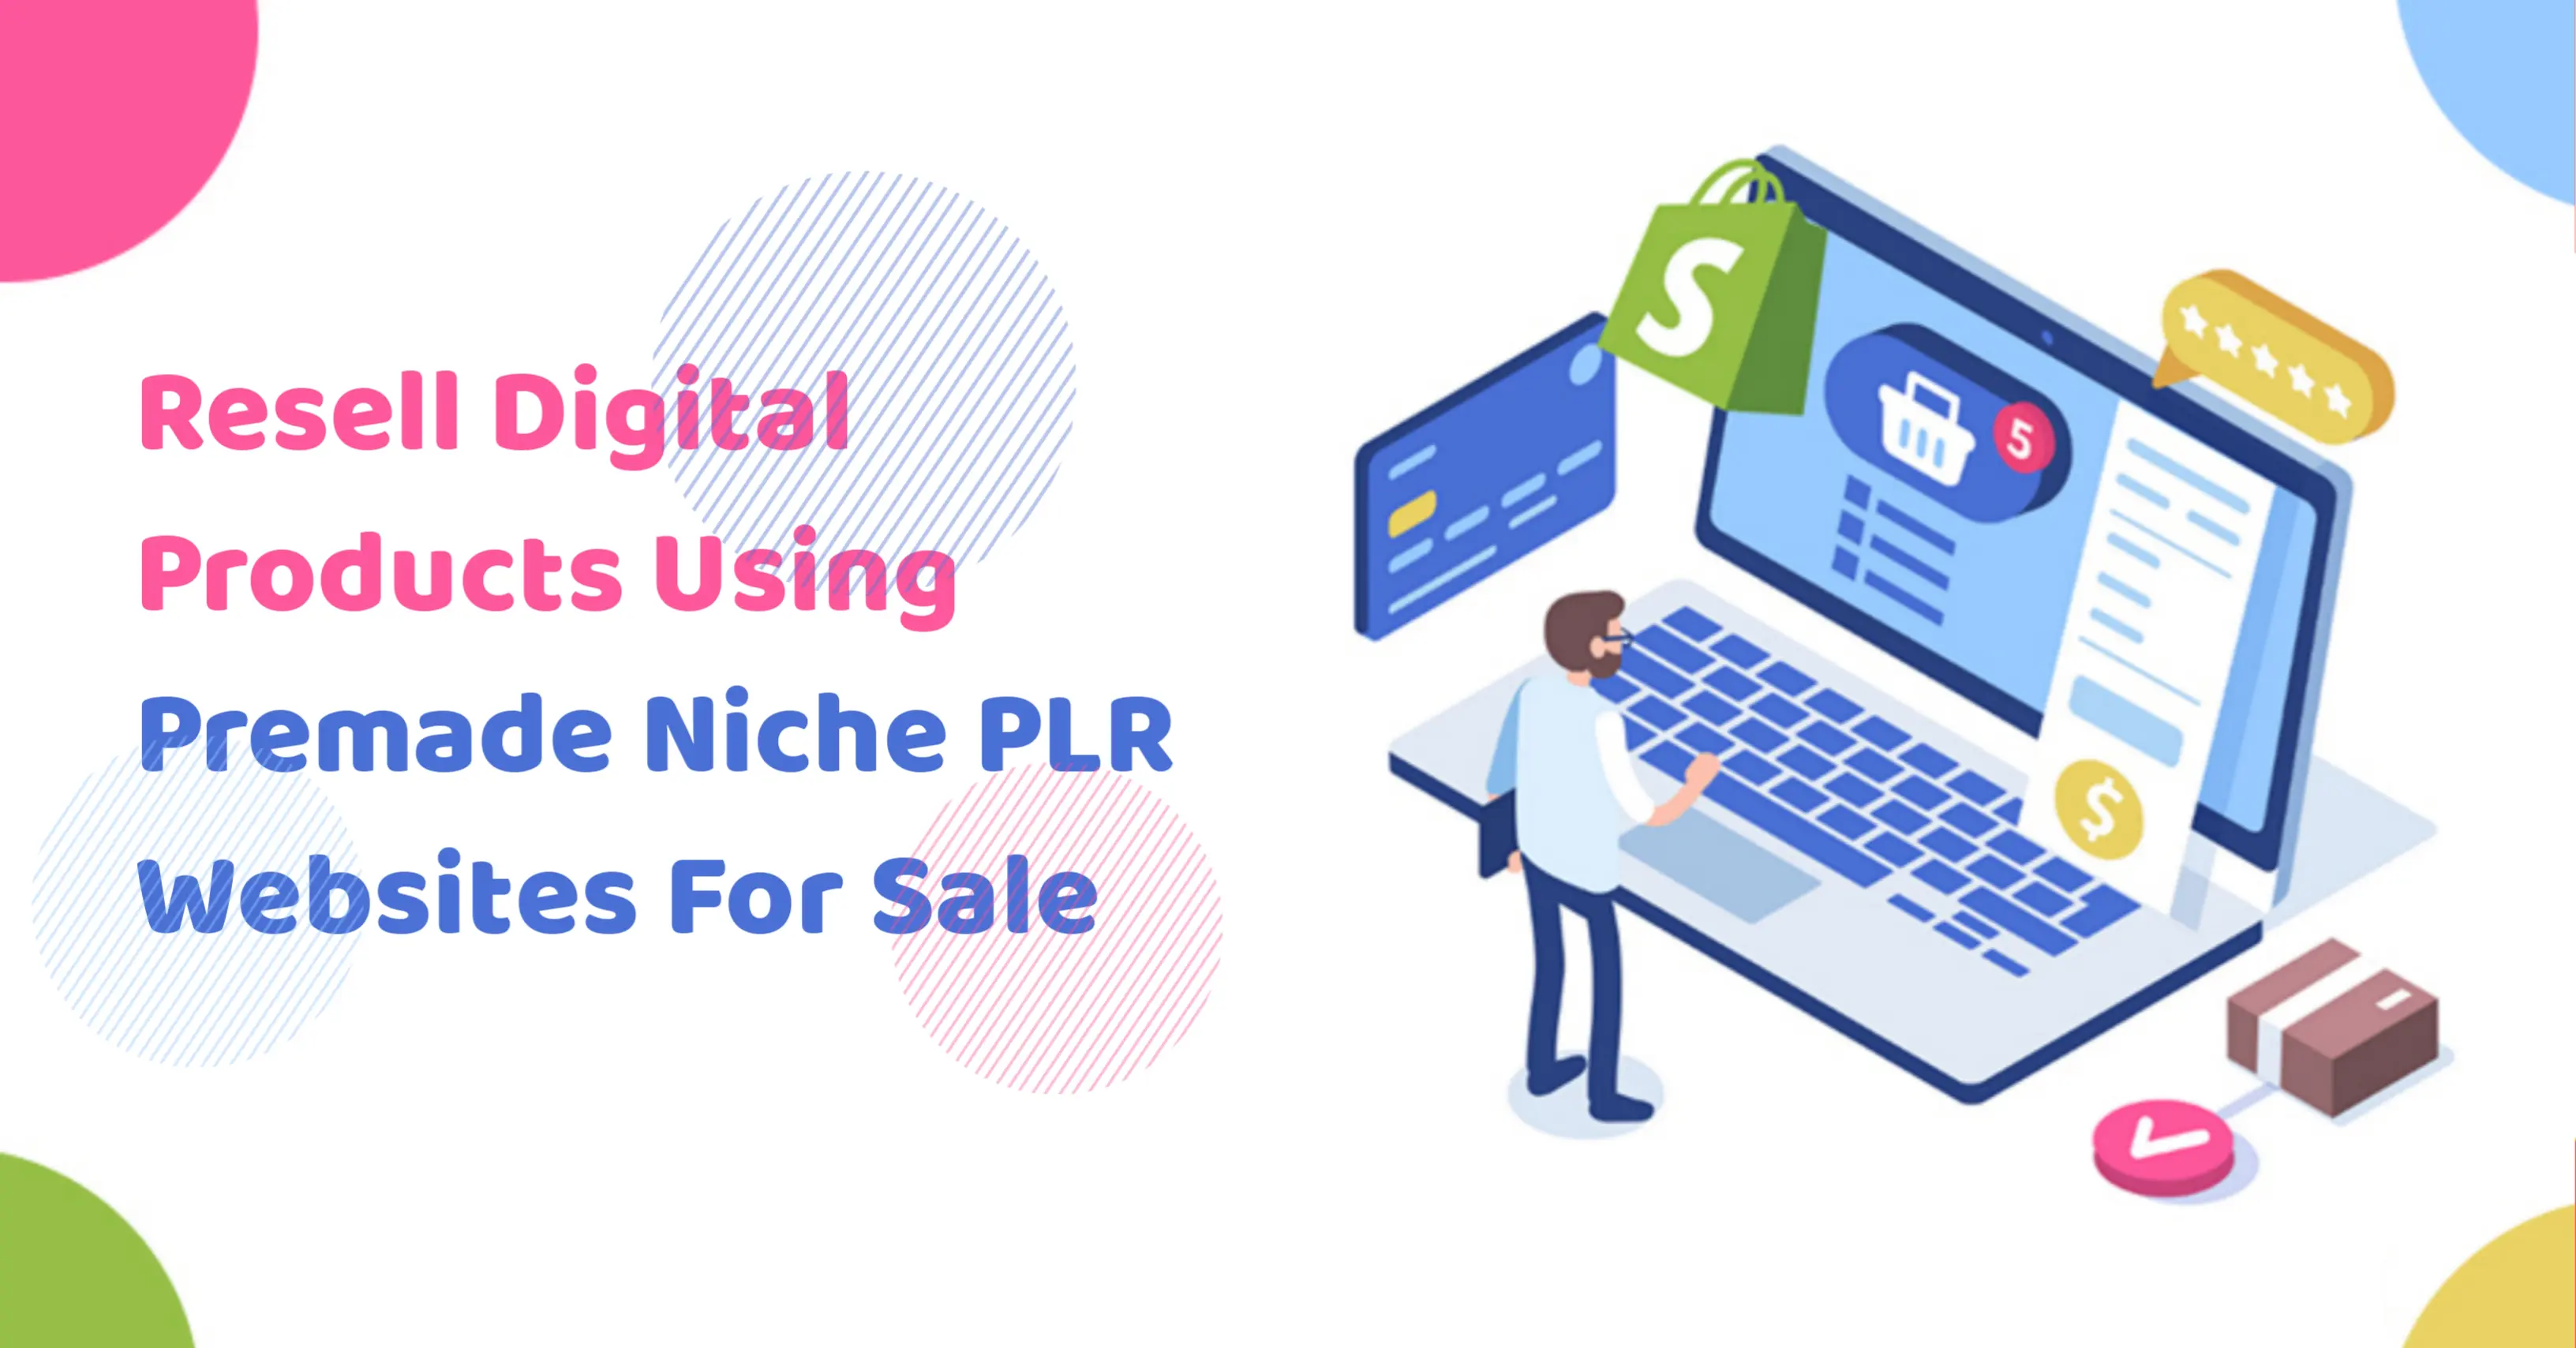 Resell Digital Products Using Premade Niche PLR Websites For Sale